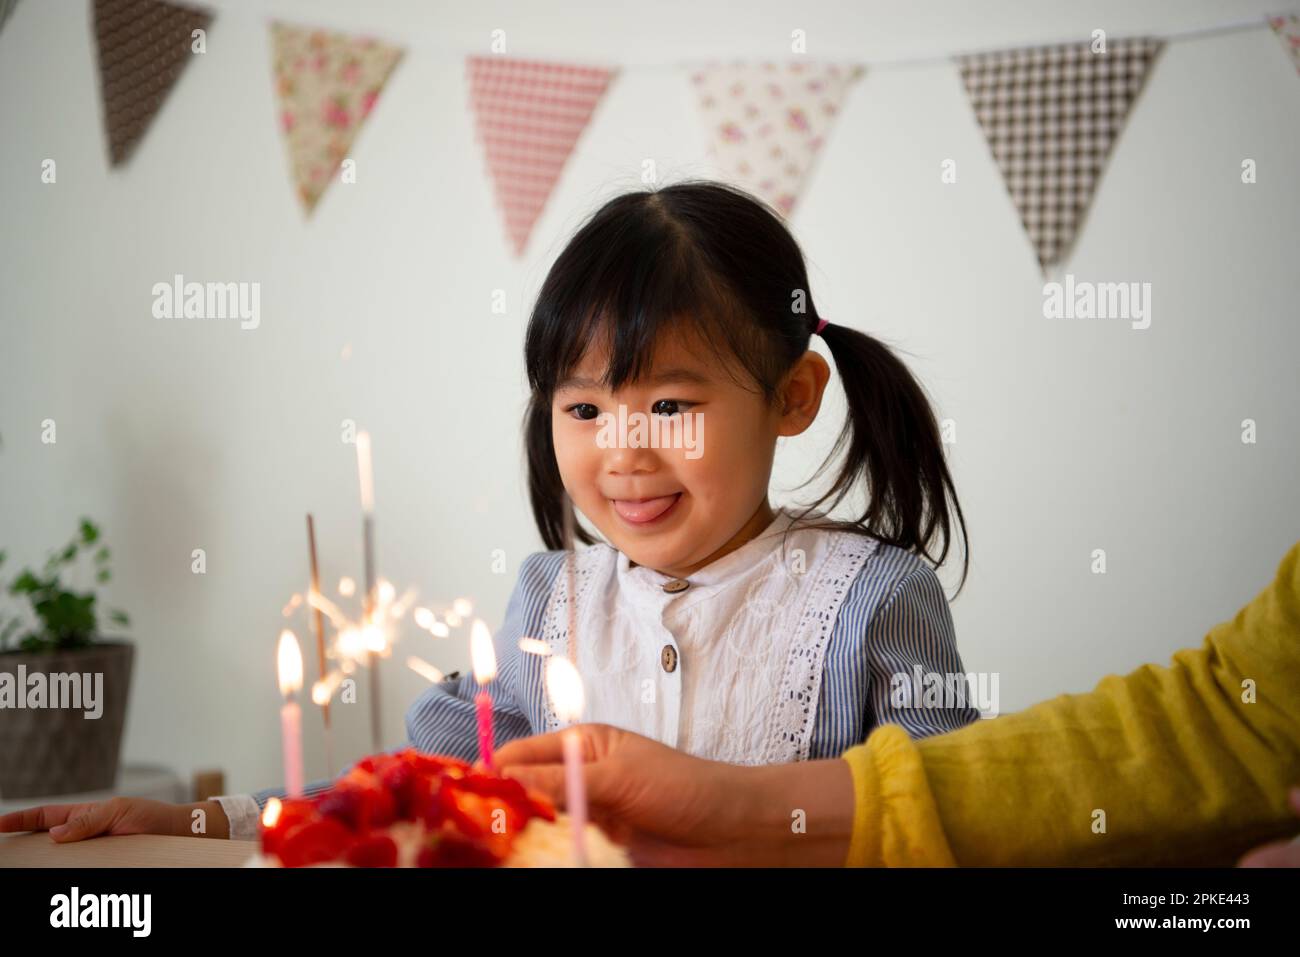 Girl looking at cake candles Stock Photo